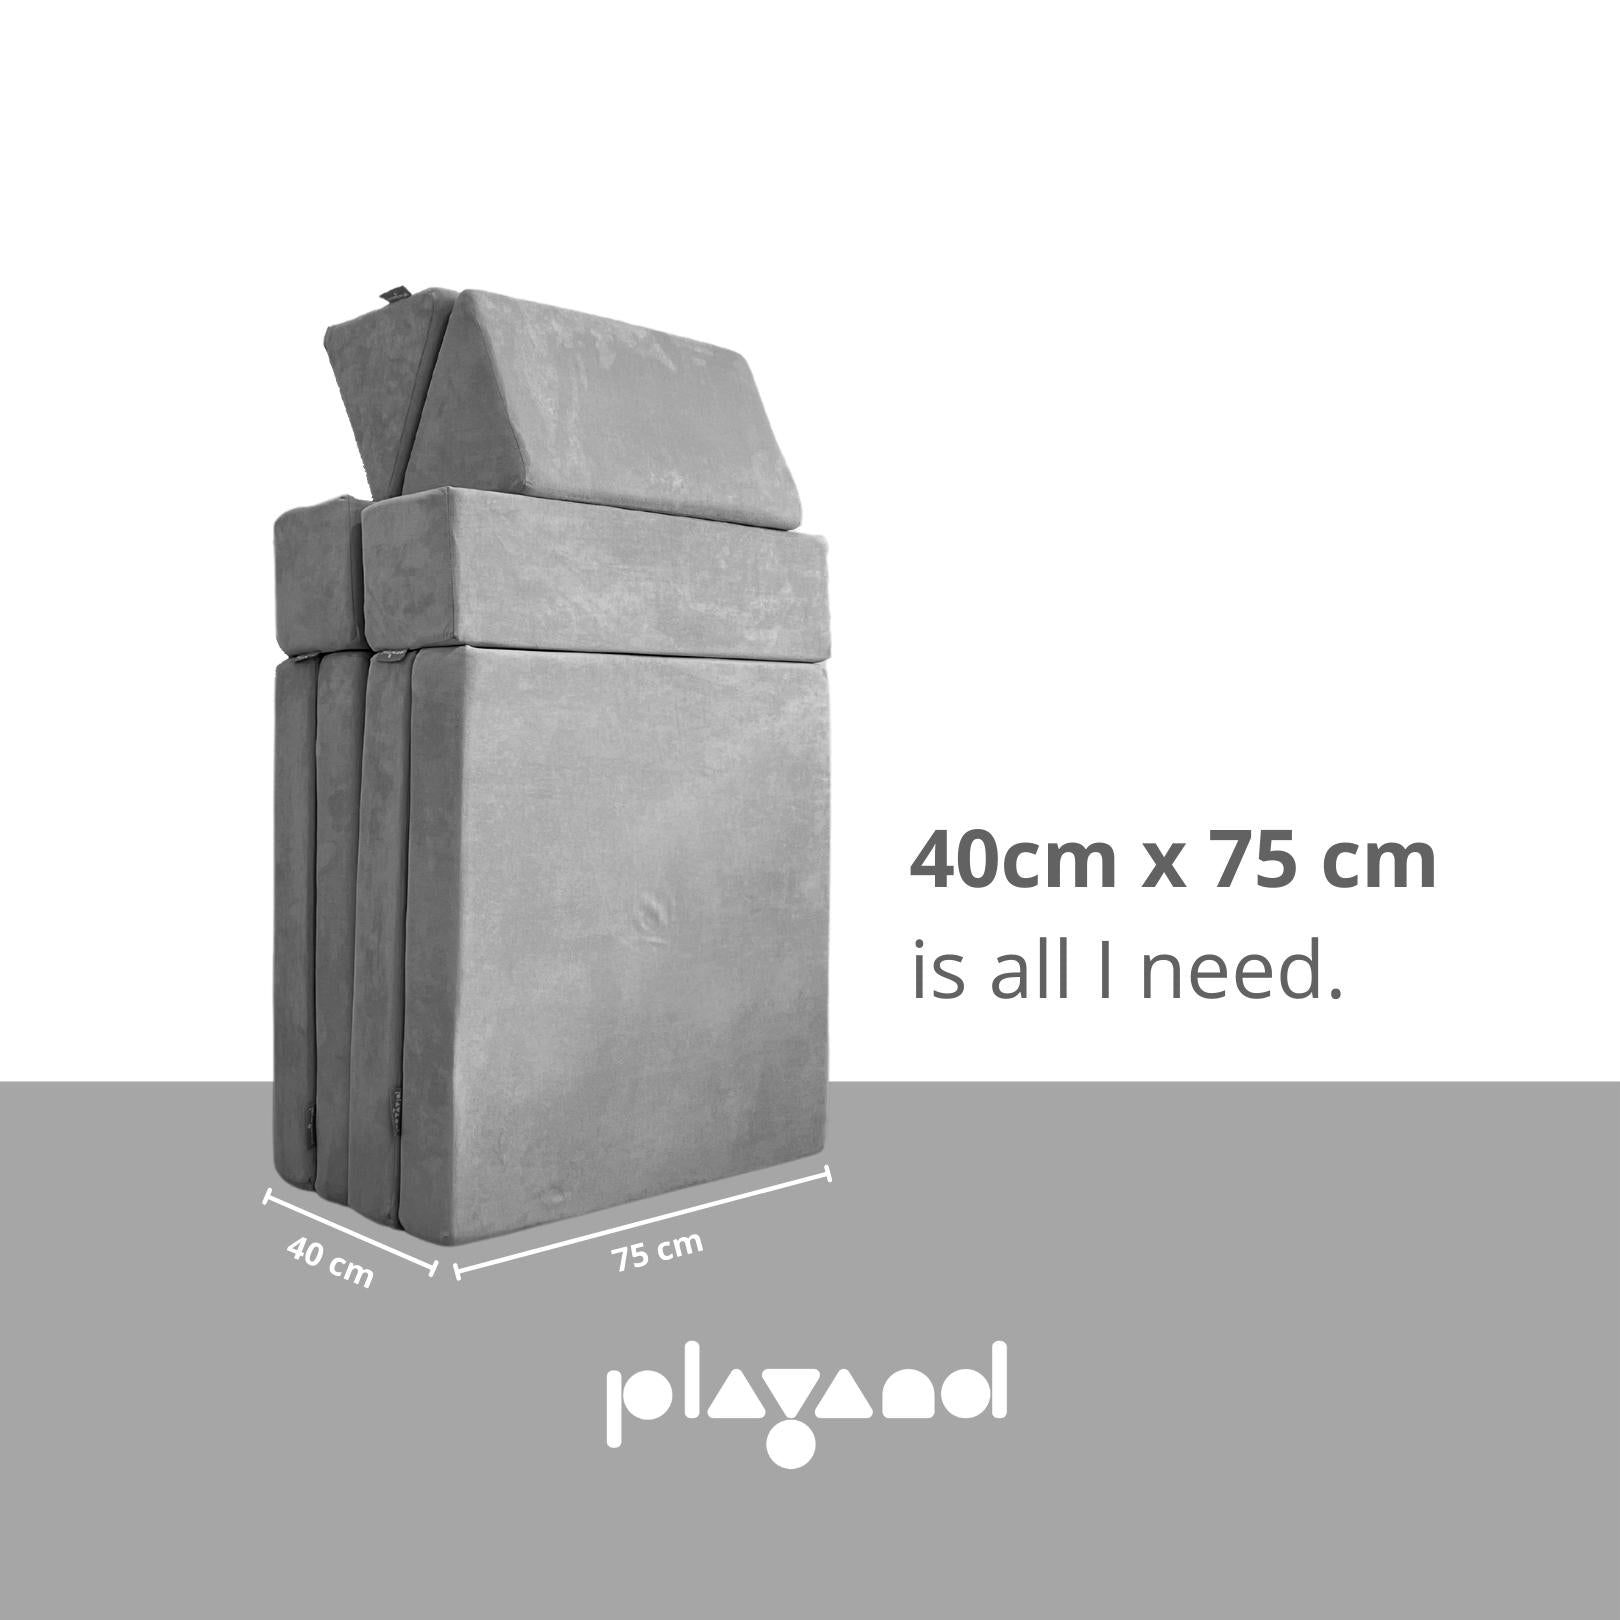 [BACKORDER] Playand Sofa In Graphite Grey